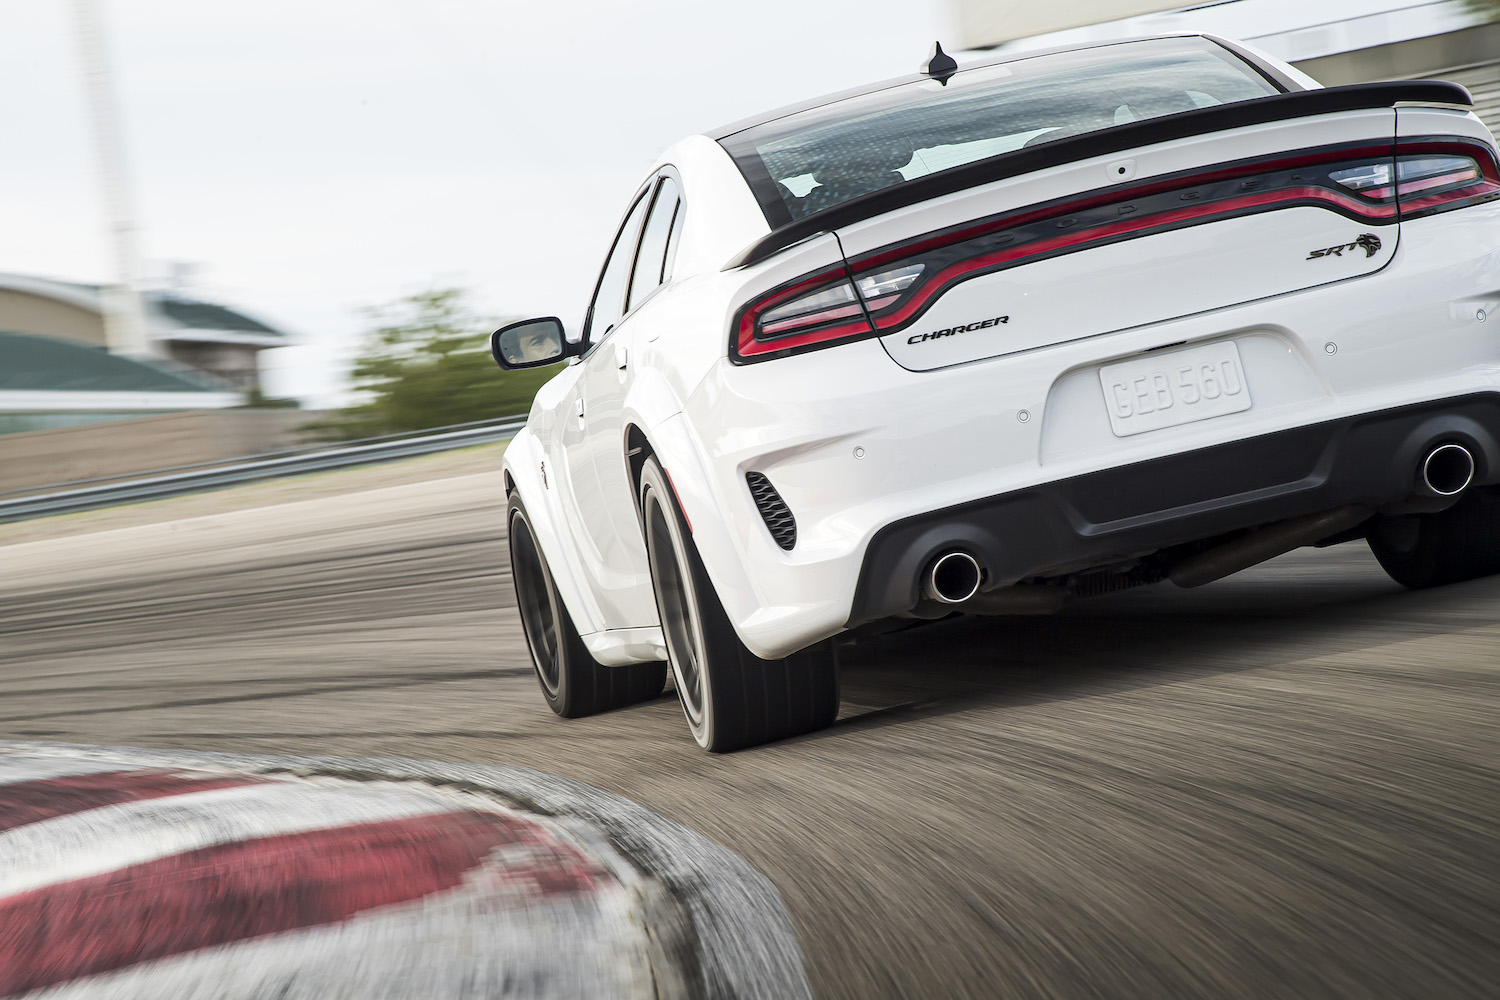 A white Dodge Charger Hellcat cornering on a racetrack.